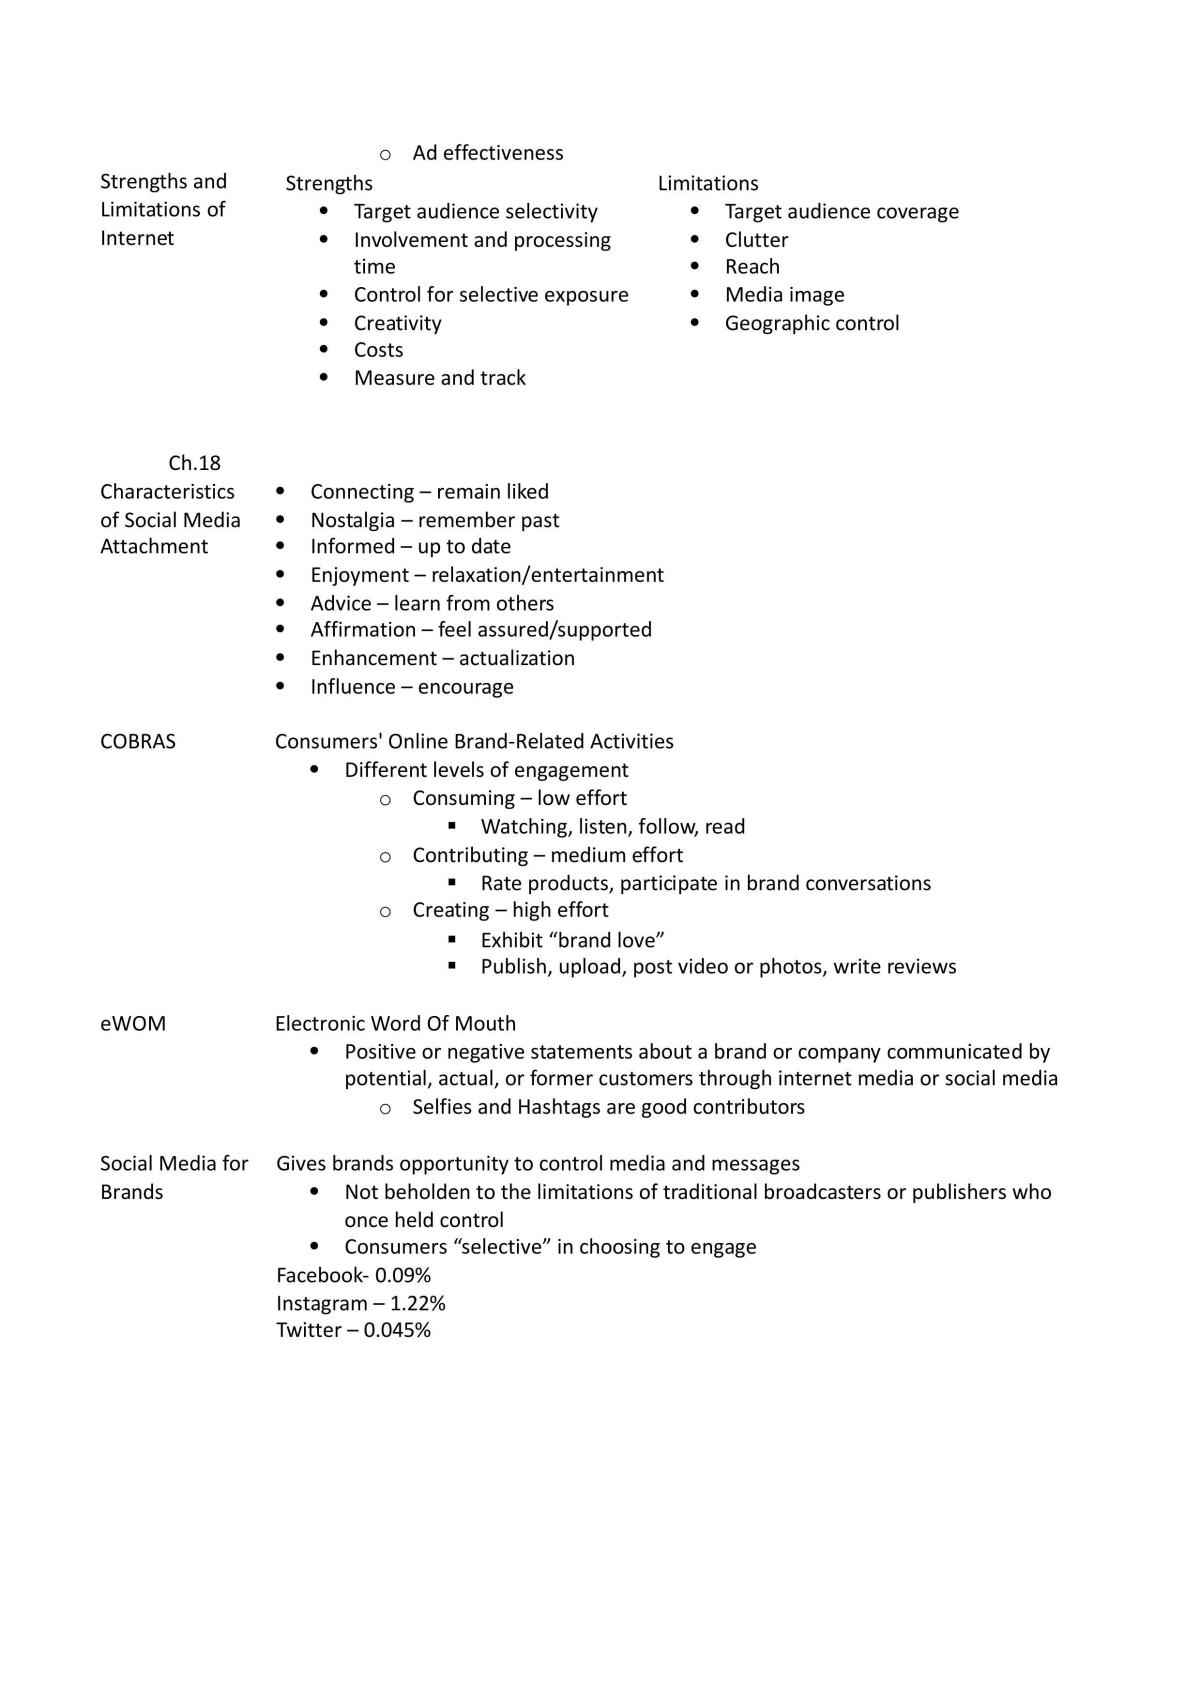 Final Review Notes for Introduction to Marketing Communications - Page 27